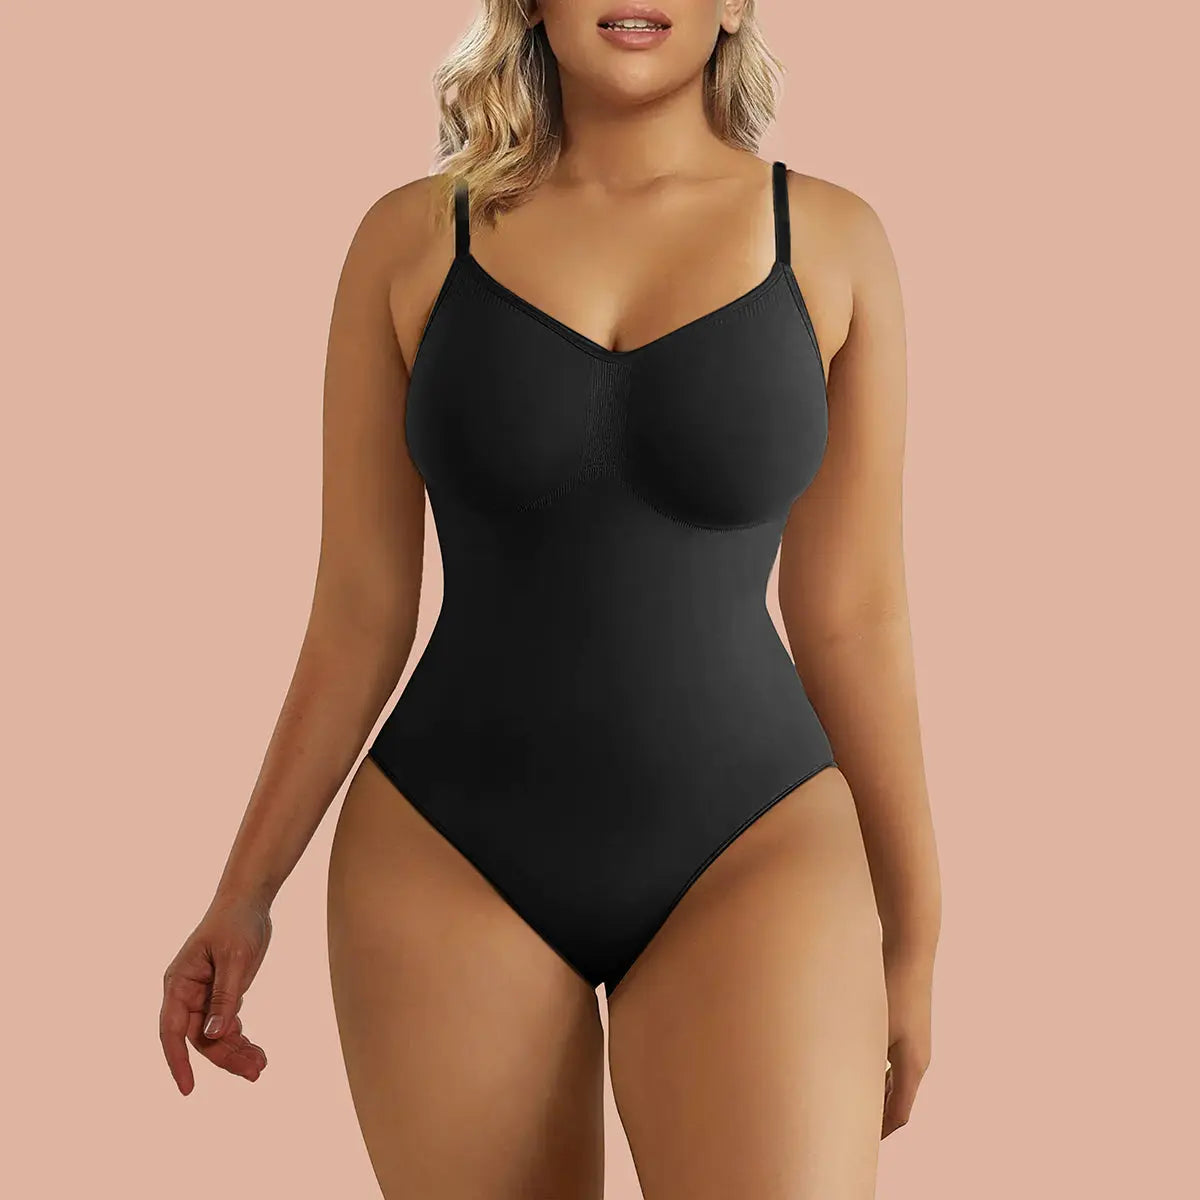 SHAPERHINT Woman's FUPA Compressor and High Waisted Women's Spandex Shapewear  Shorts with Tummy, Butt, Thigh, Back and FUPA Control (Black, XS/Small) at   Women's Clothing store